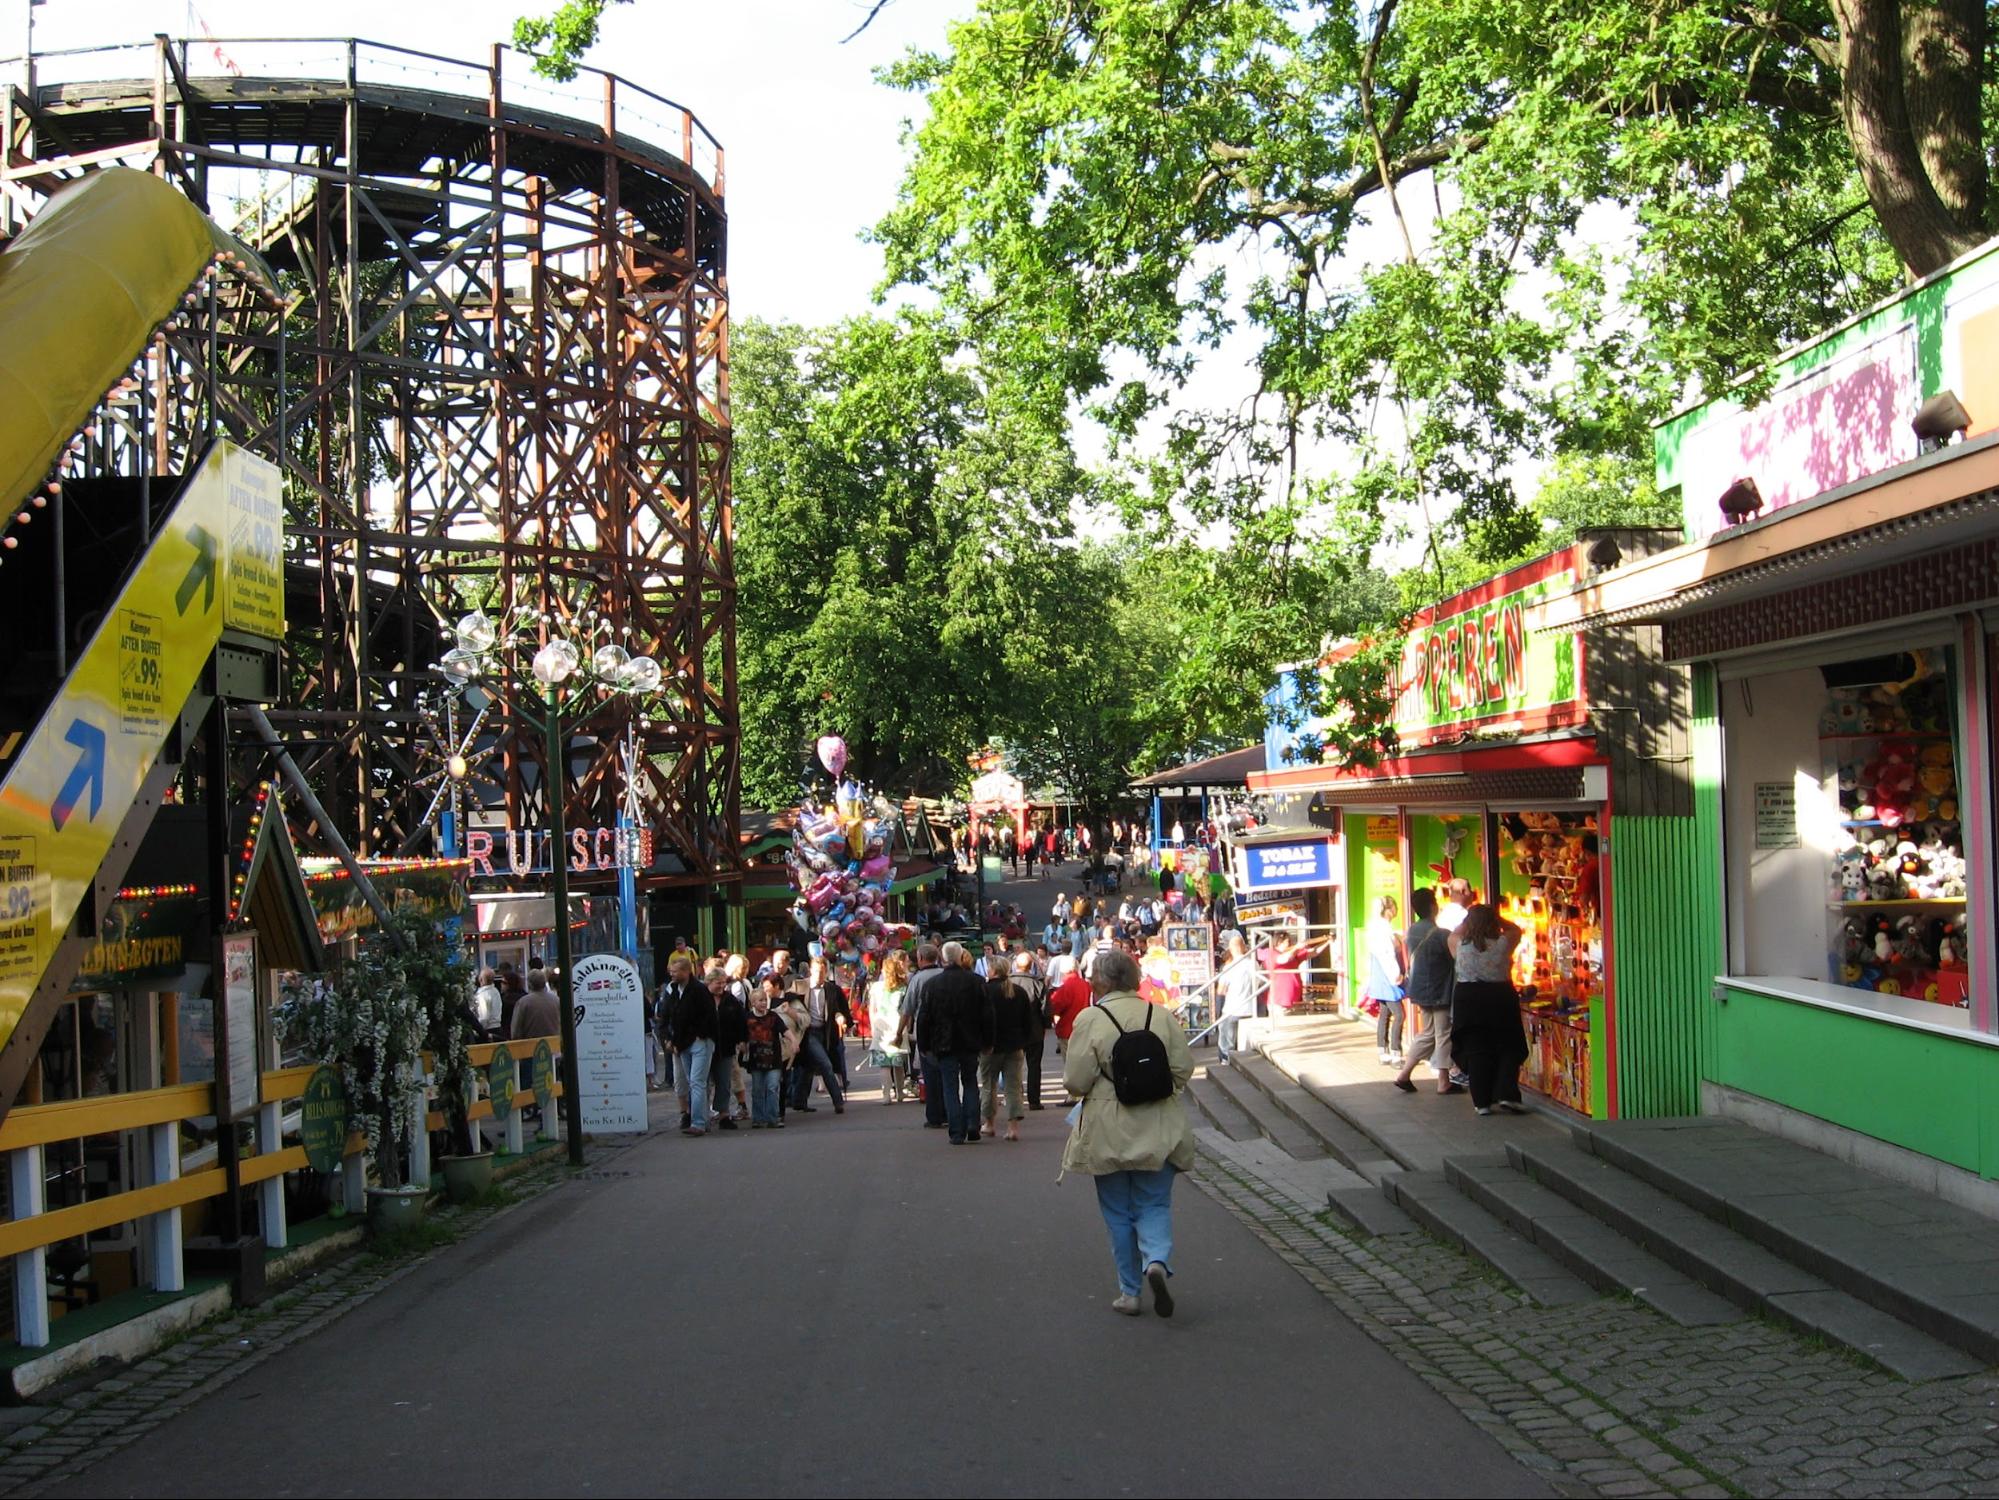 The World's Oldest Operating Amusement Park Opened in 1583